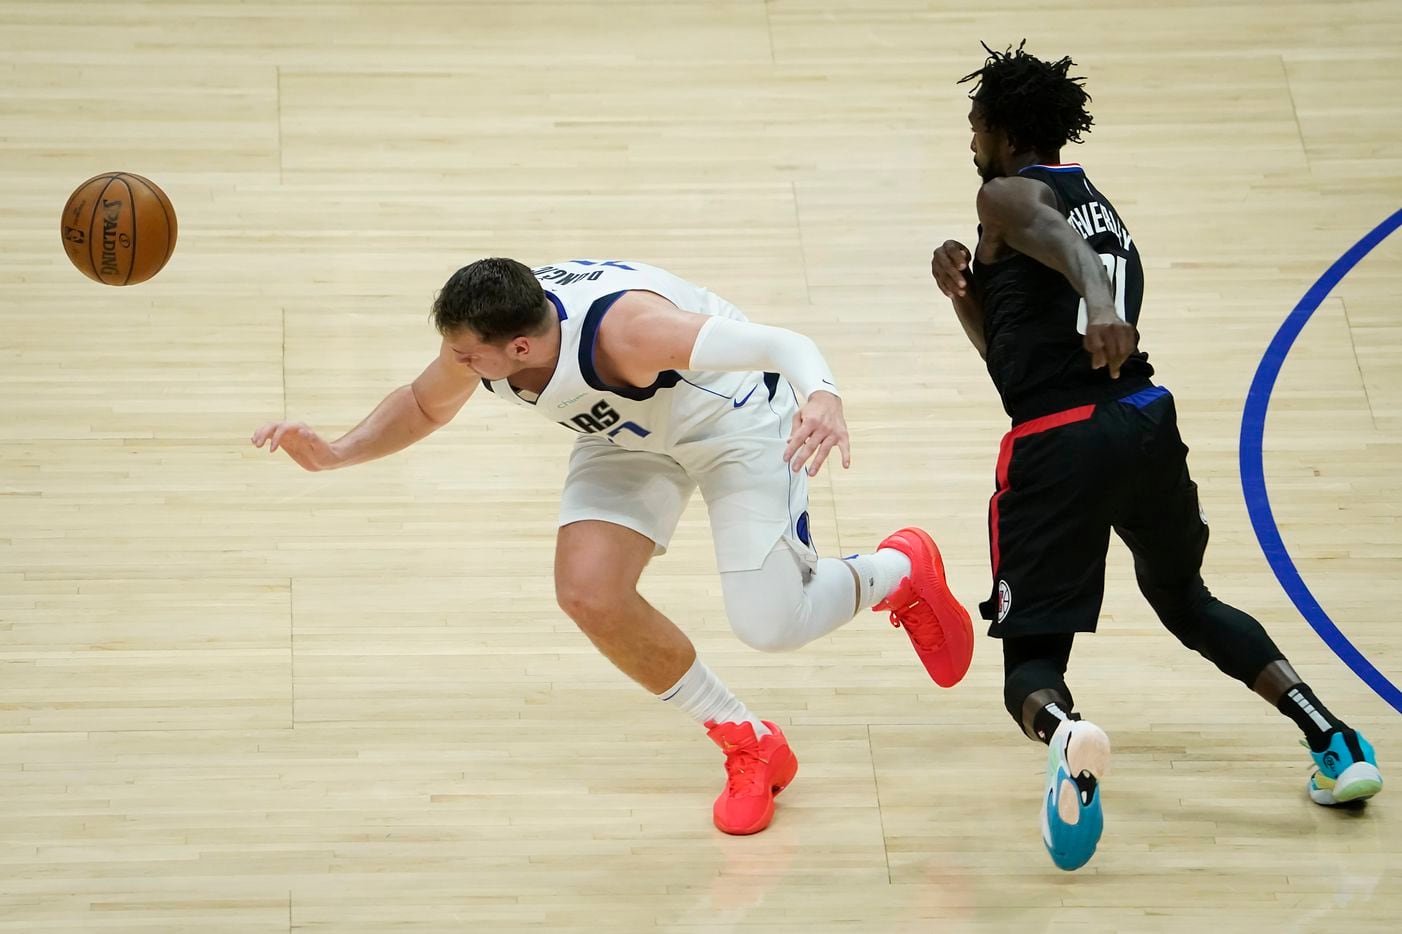 Dallas Mavericks guard Luka Doncic (77) has the ball stolen by LA Clippers guard Patrick Beverley (21) during the first half of an NBA playoff basketball game at Staples Center on Tuesday, May 25, 2021, in Los Angeles.